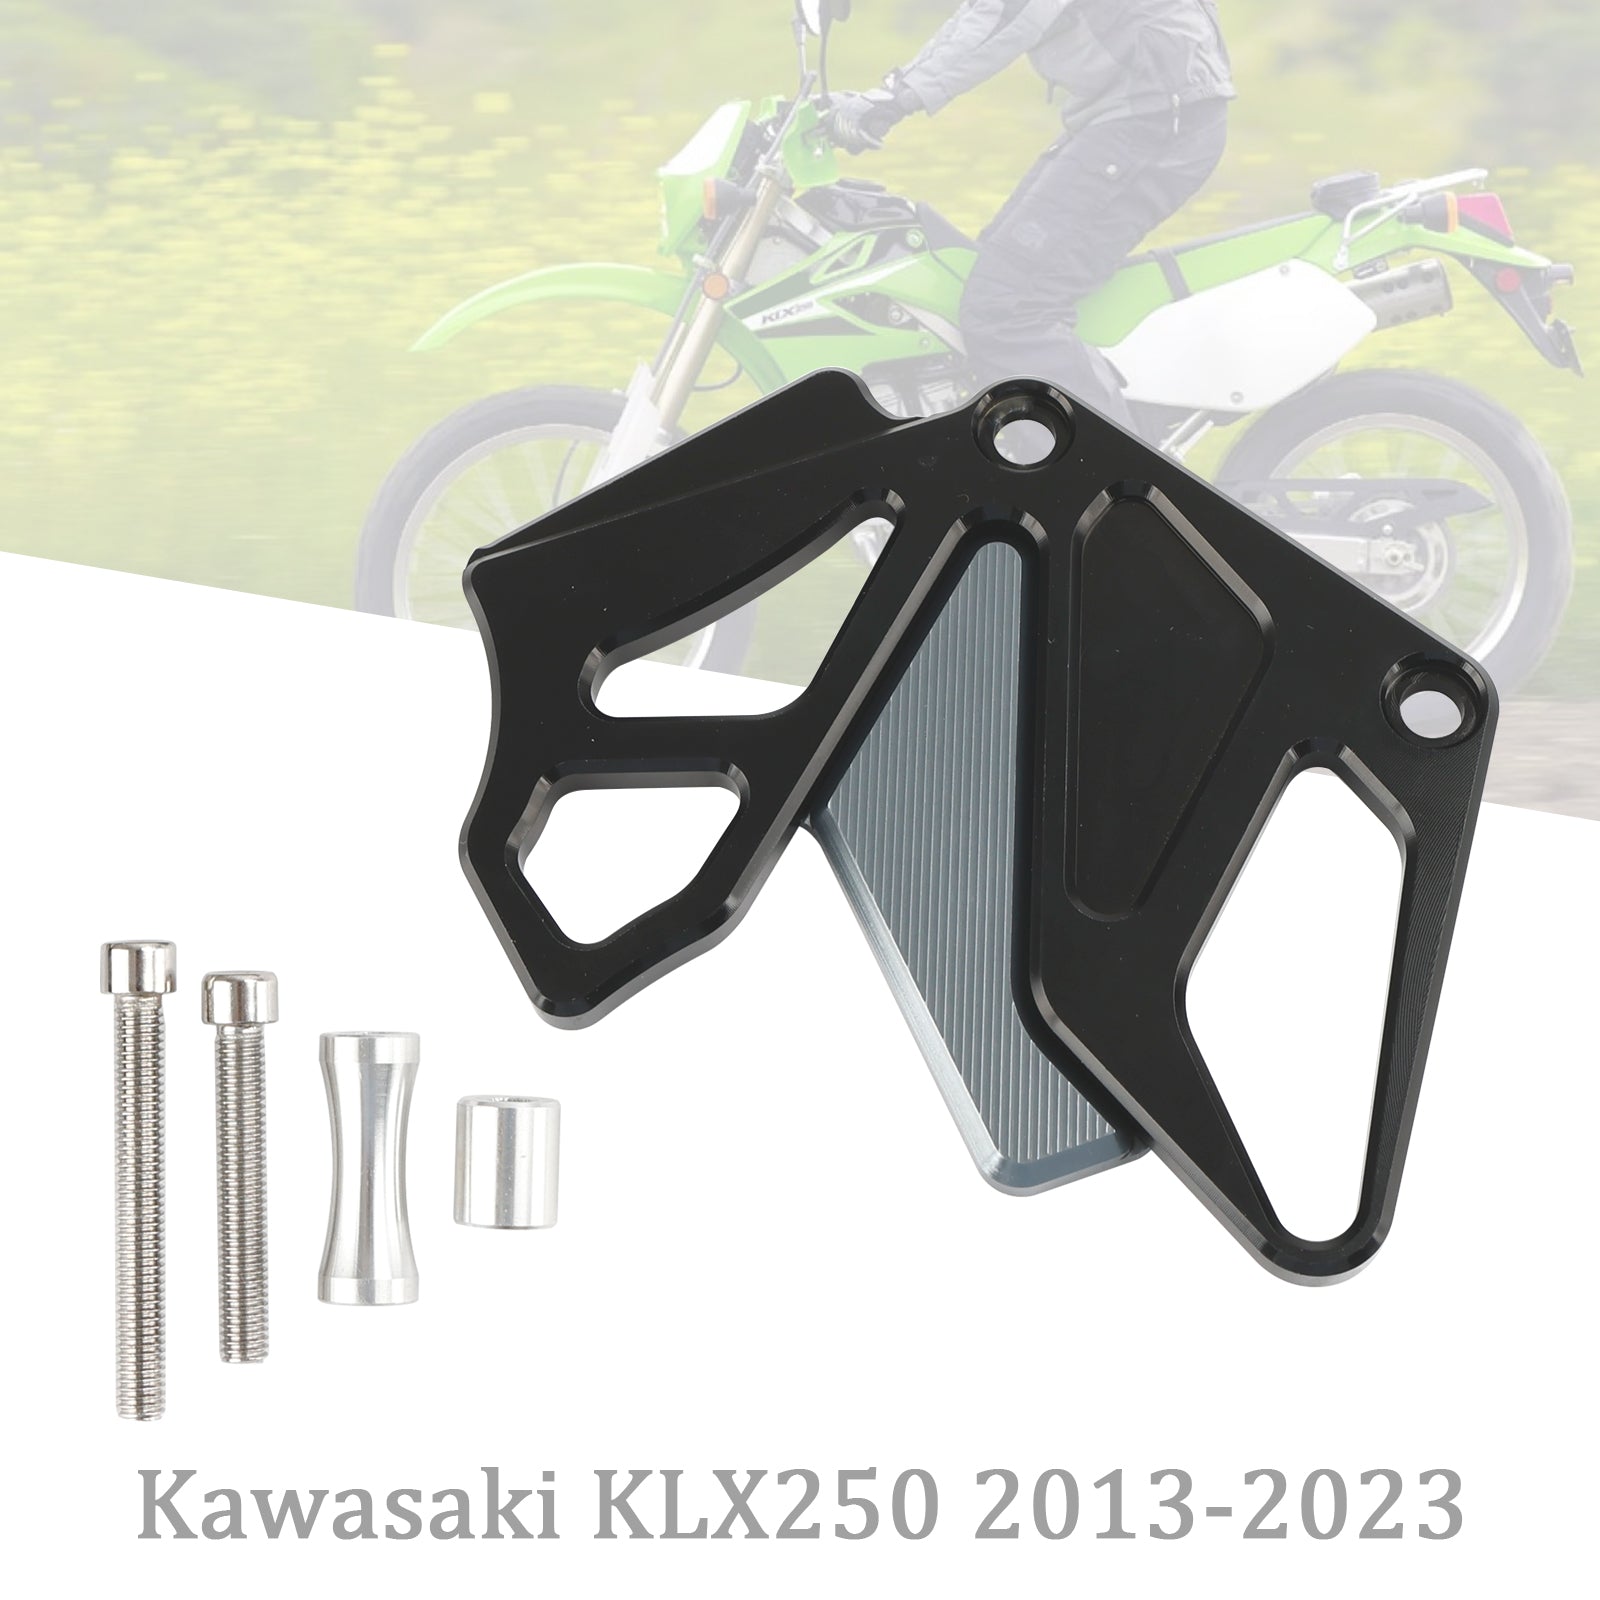 Front Sprocket Cover Chain Guard Protector For Kawasaki KLX250 2013-2023